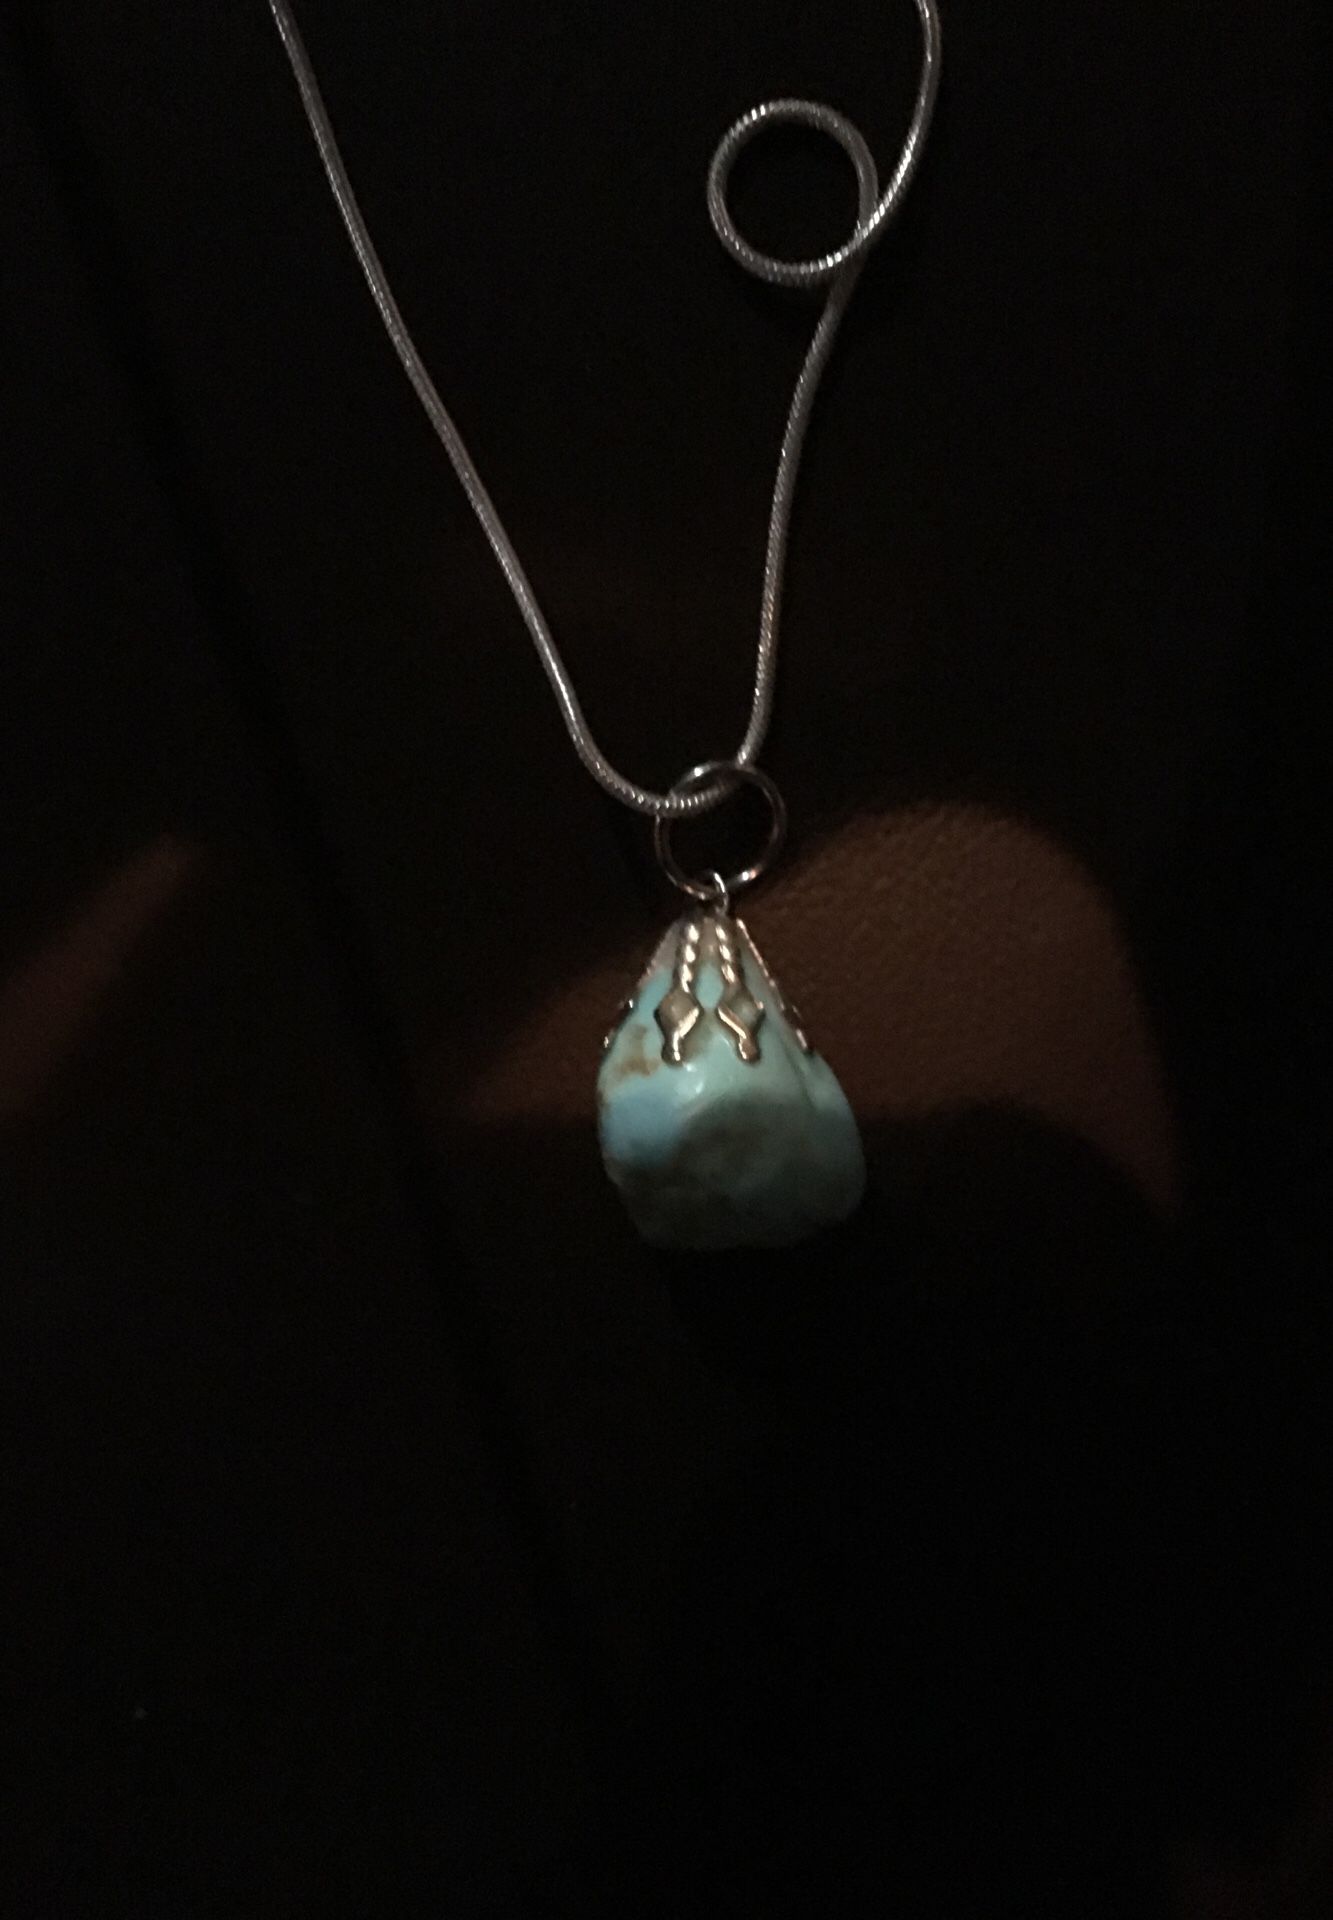 New silver chain, turquoise necklace